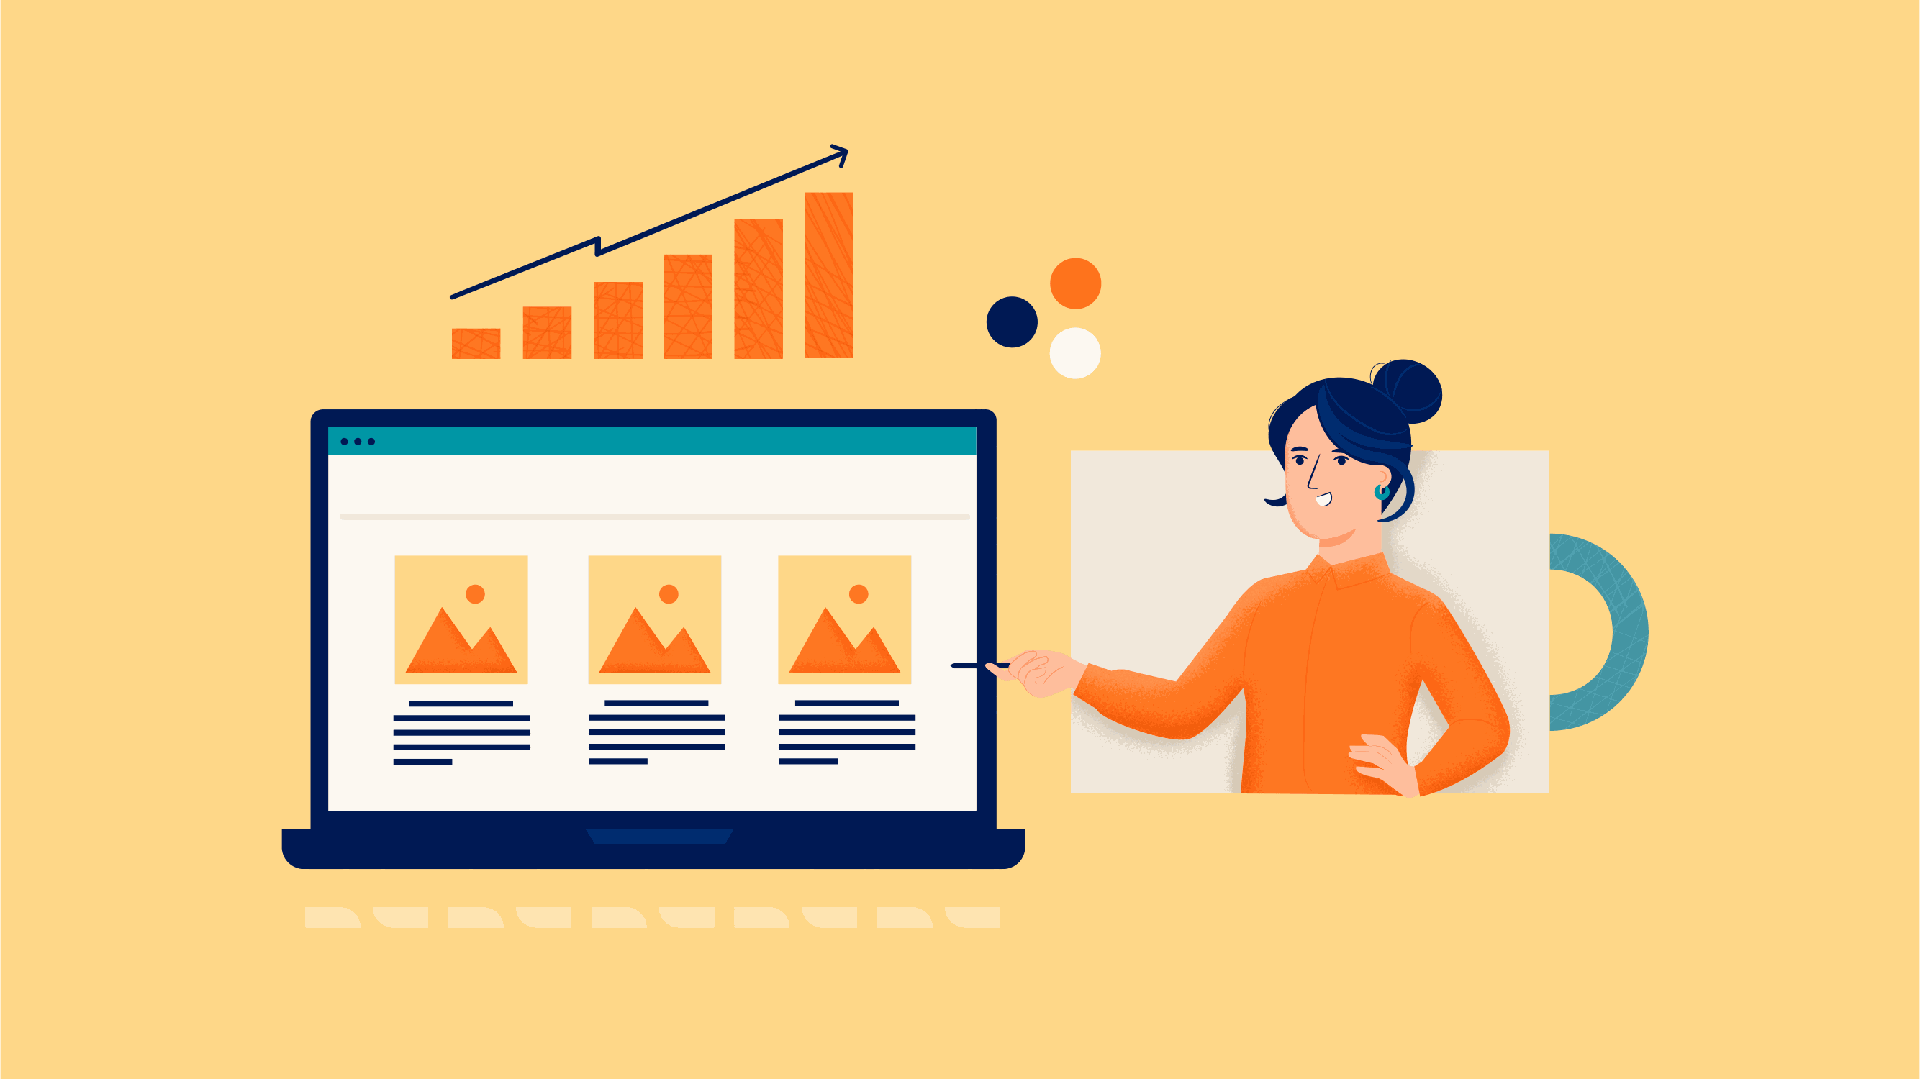 Is your website generating enough leads: illustration of attorney pointing to website with graphics indicating growth above